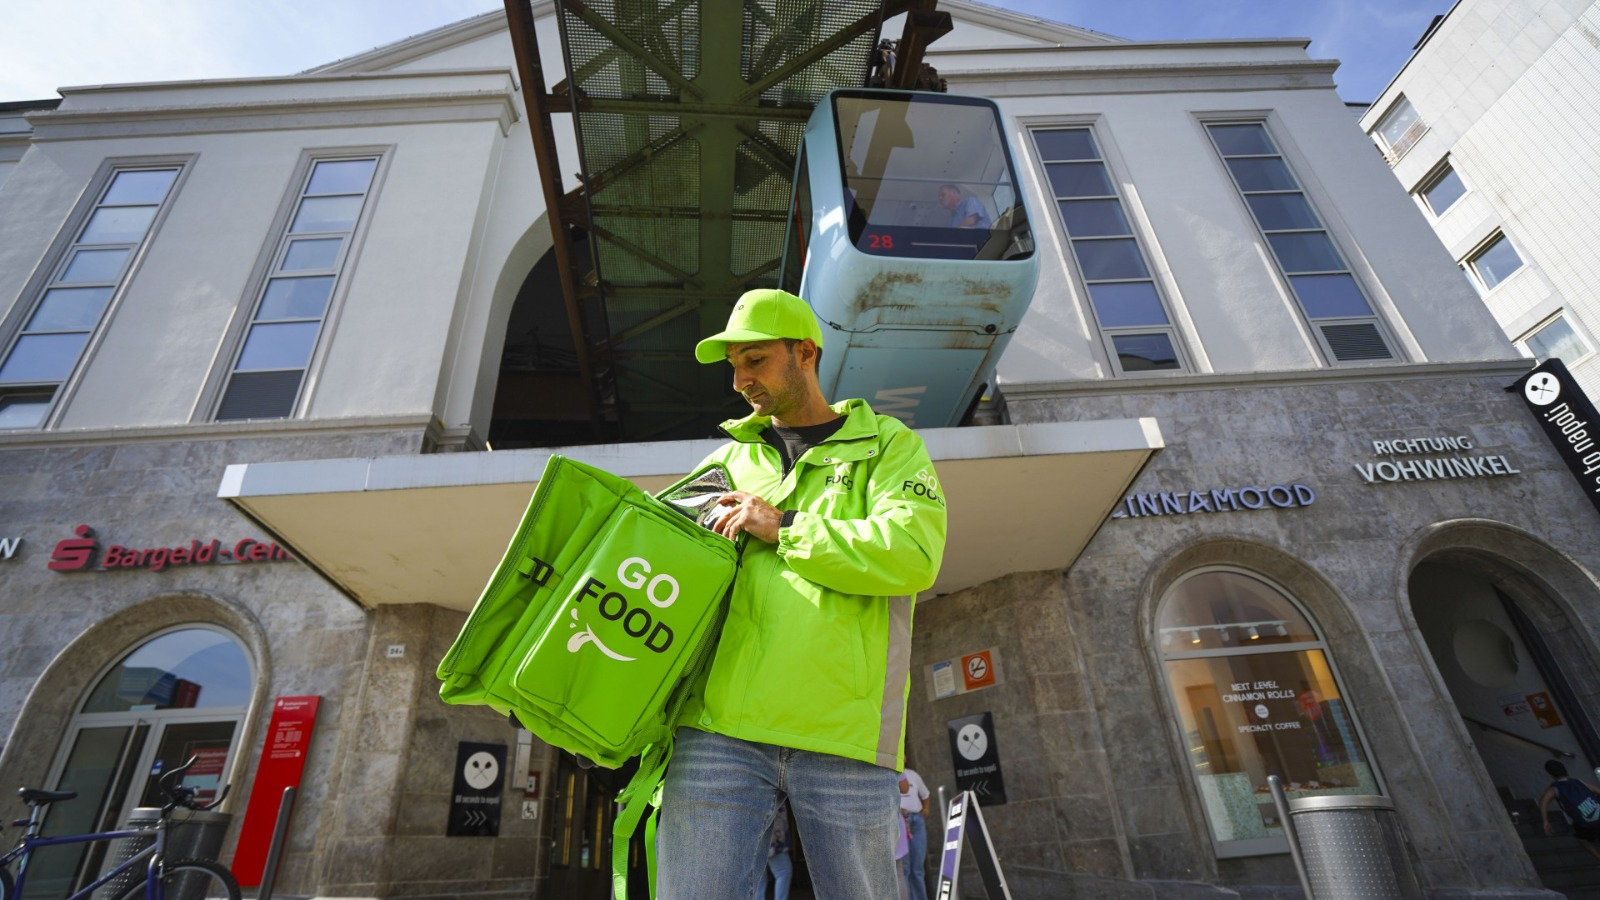 Food delivery worker in green attire ready for service in an urban setting with a tram passing by in the background.